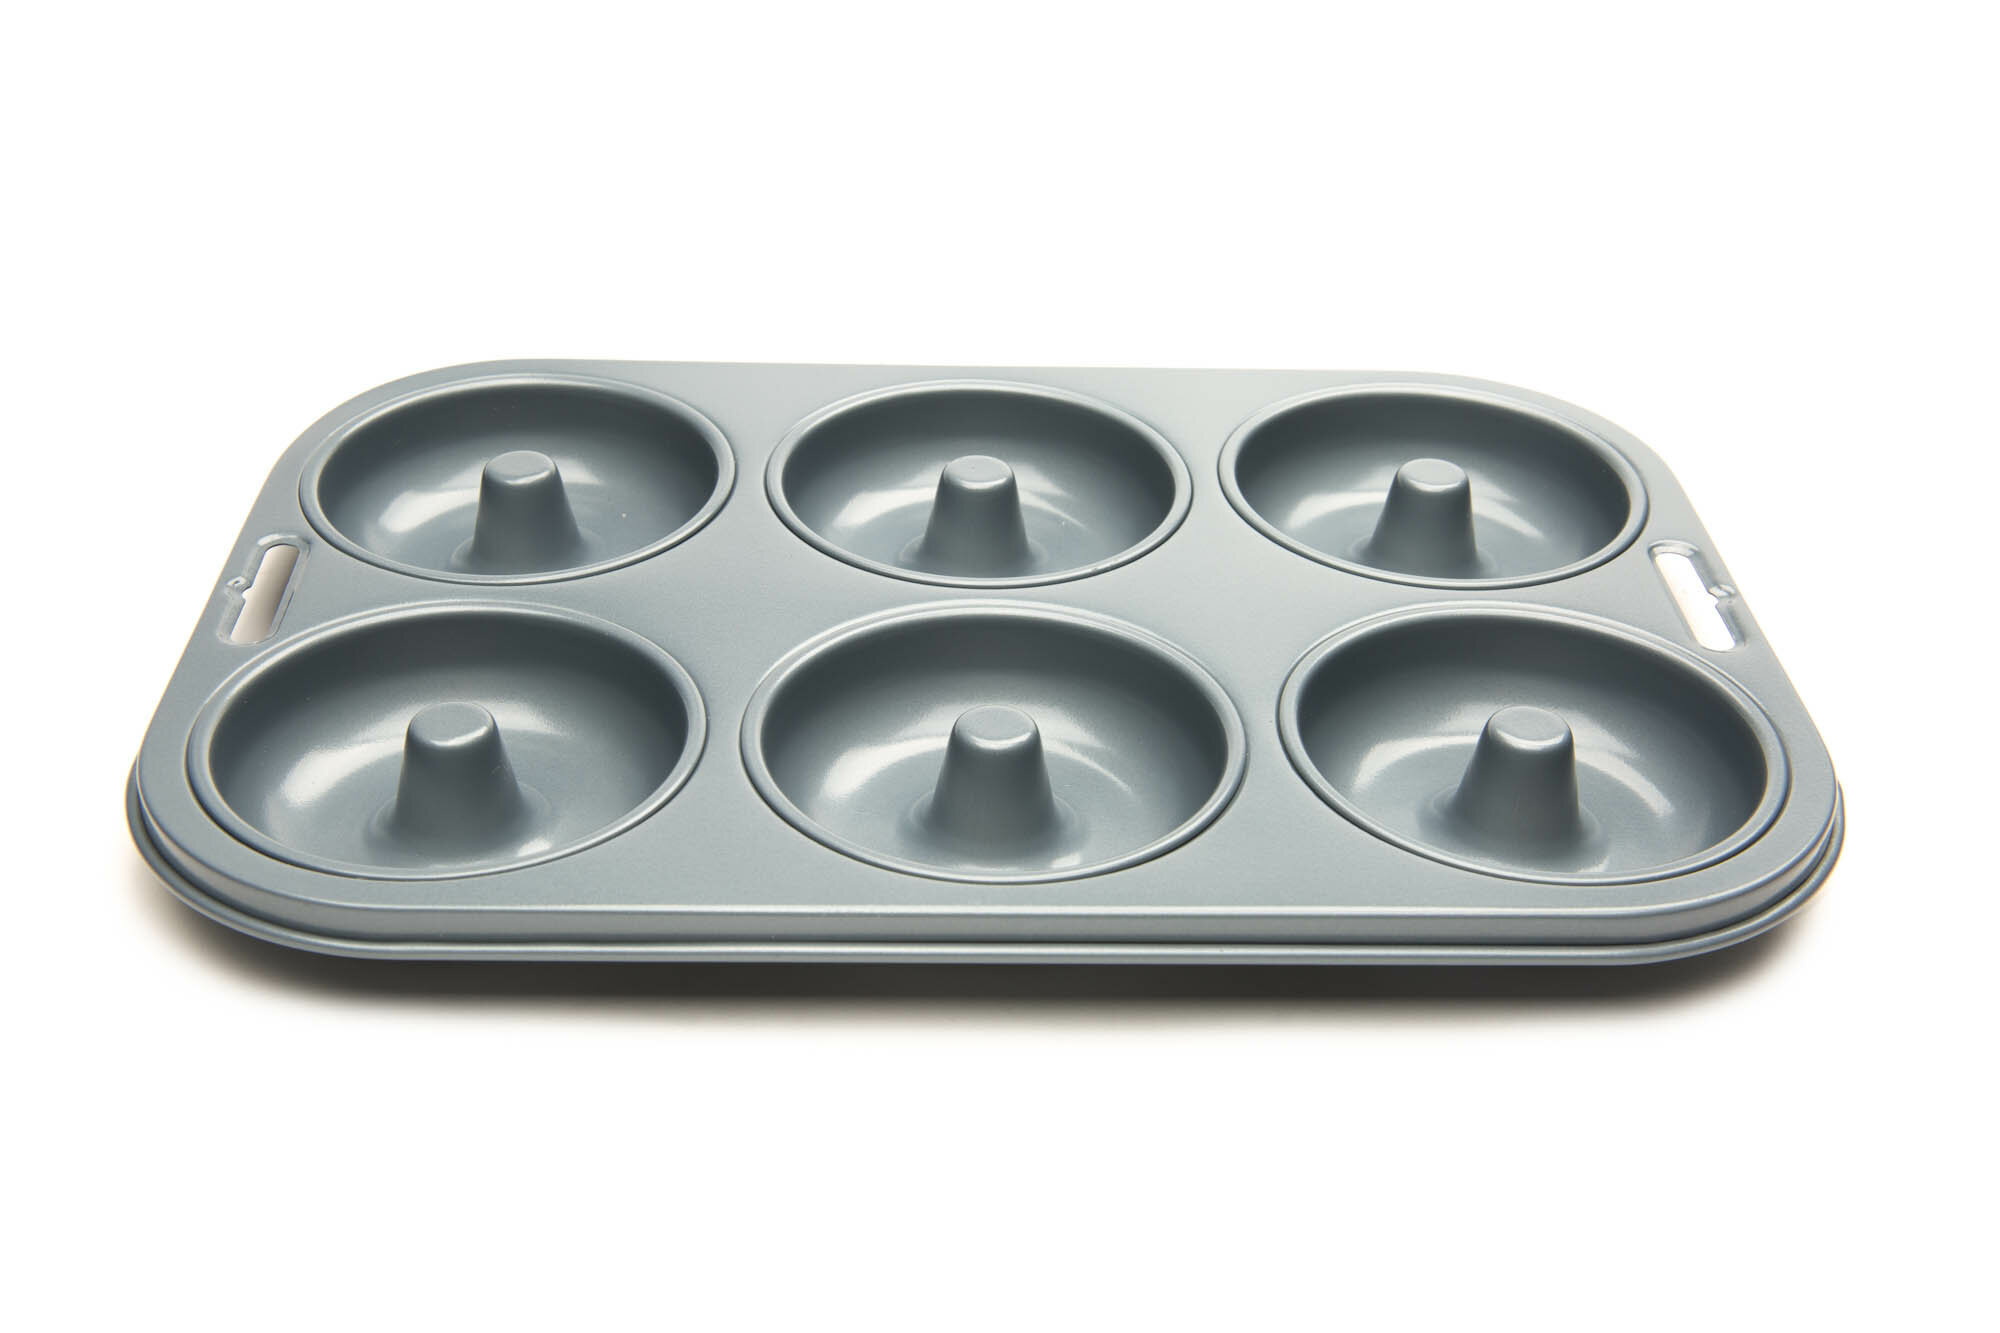 Wilton 115 Pieces Baking Set ( Be The First To Use The New 115 Bakeware Set  )